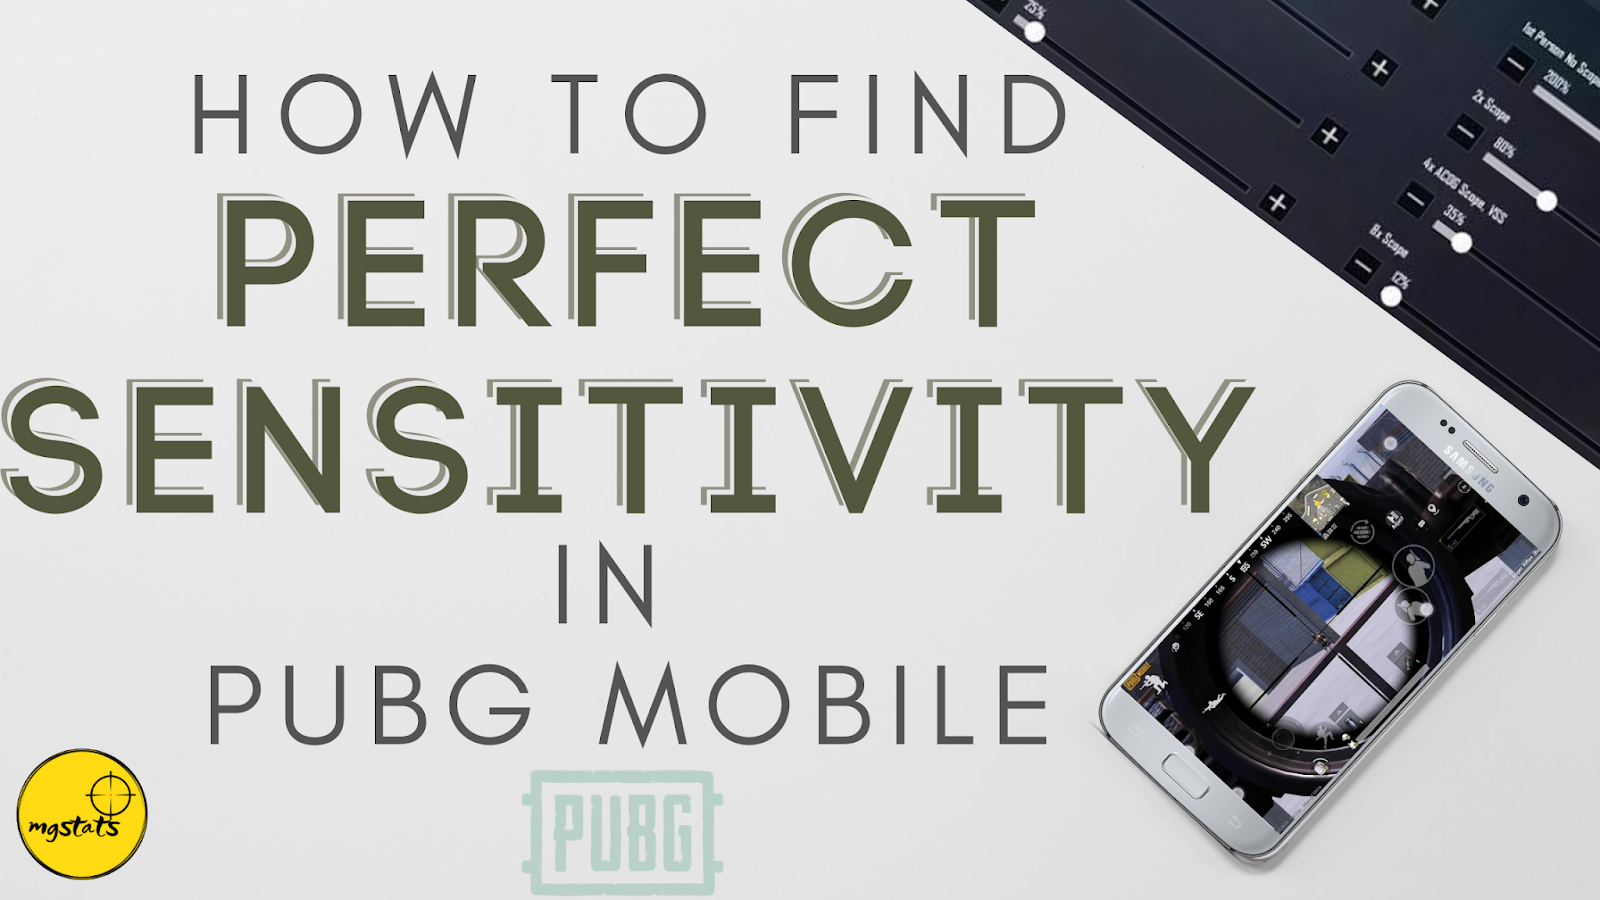 Mgstats How To Make Your Own Pubg Mobile Perfect Sensitivity Settings